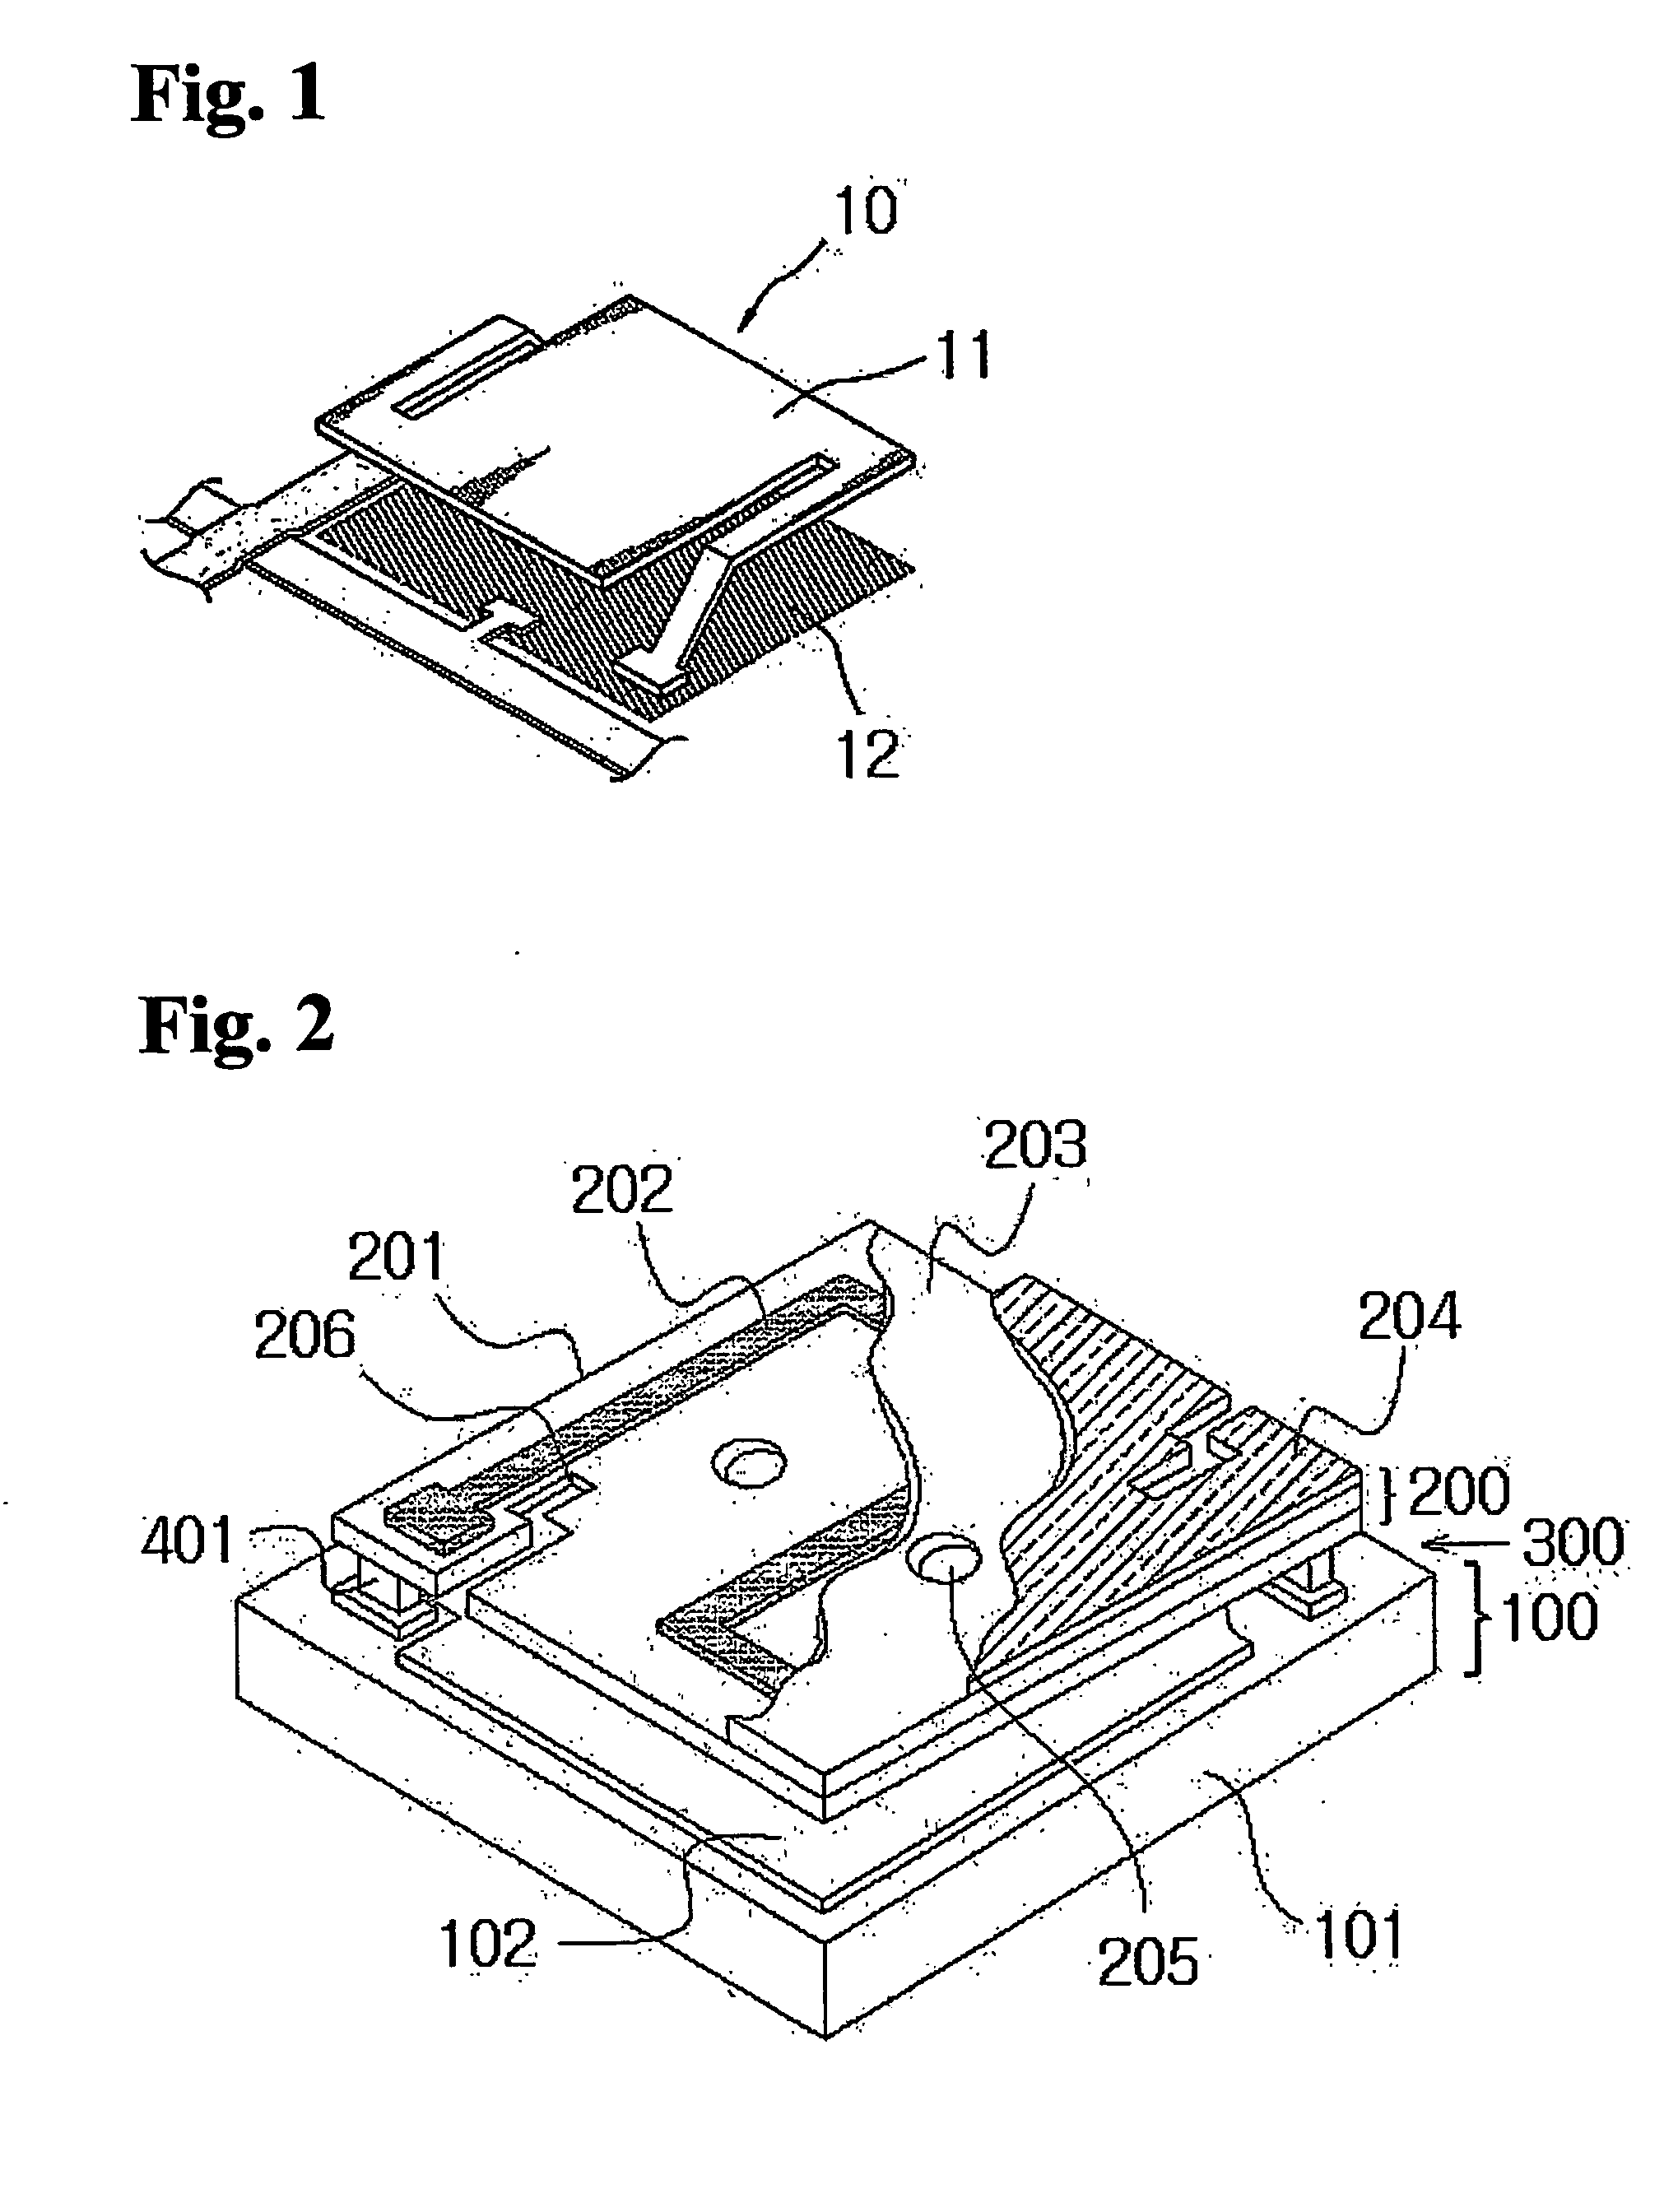 Bolometric Infrared Sensor Having Two-Layer Structure and Method for Manufacturing the Same